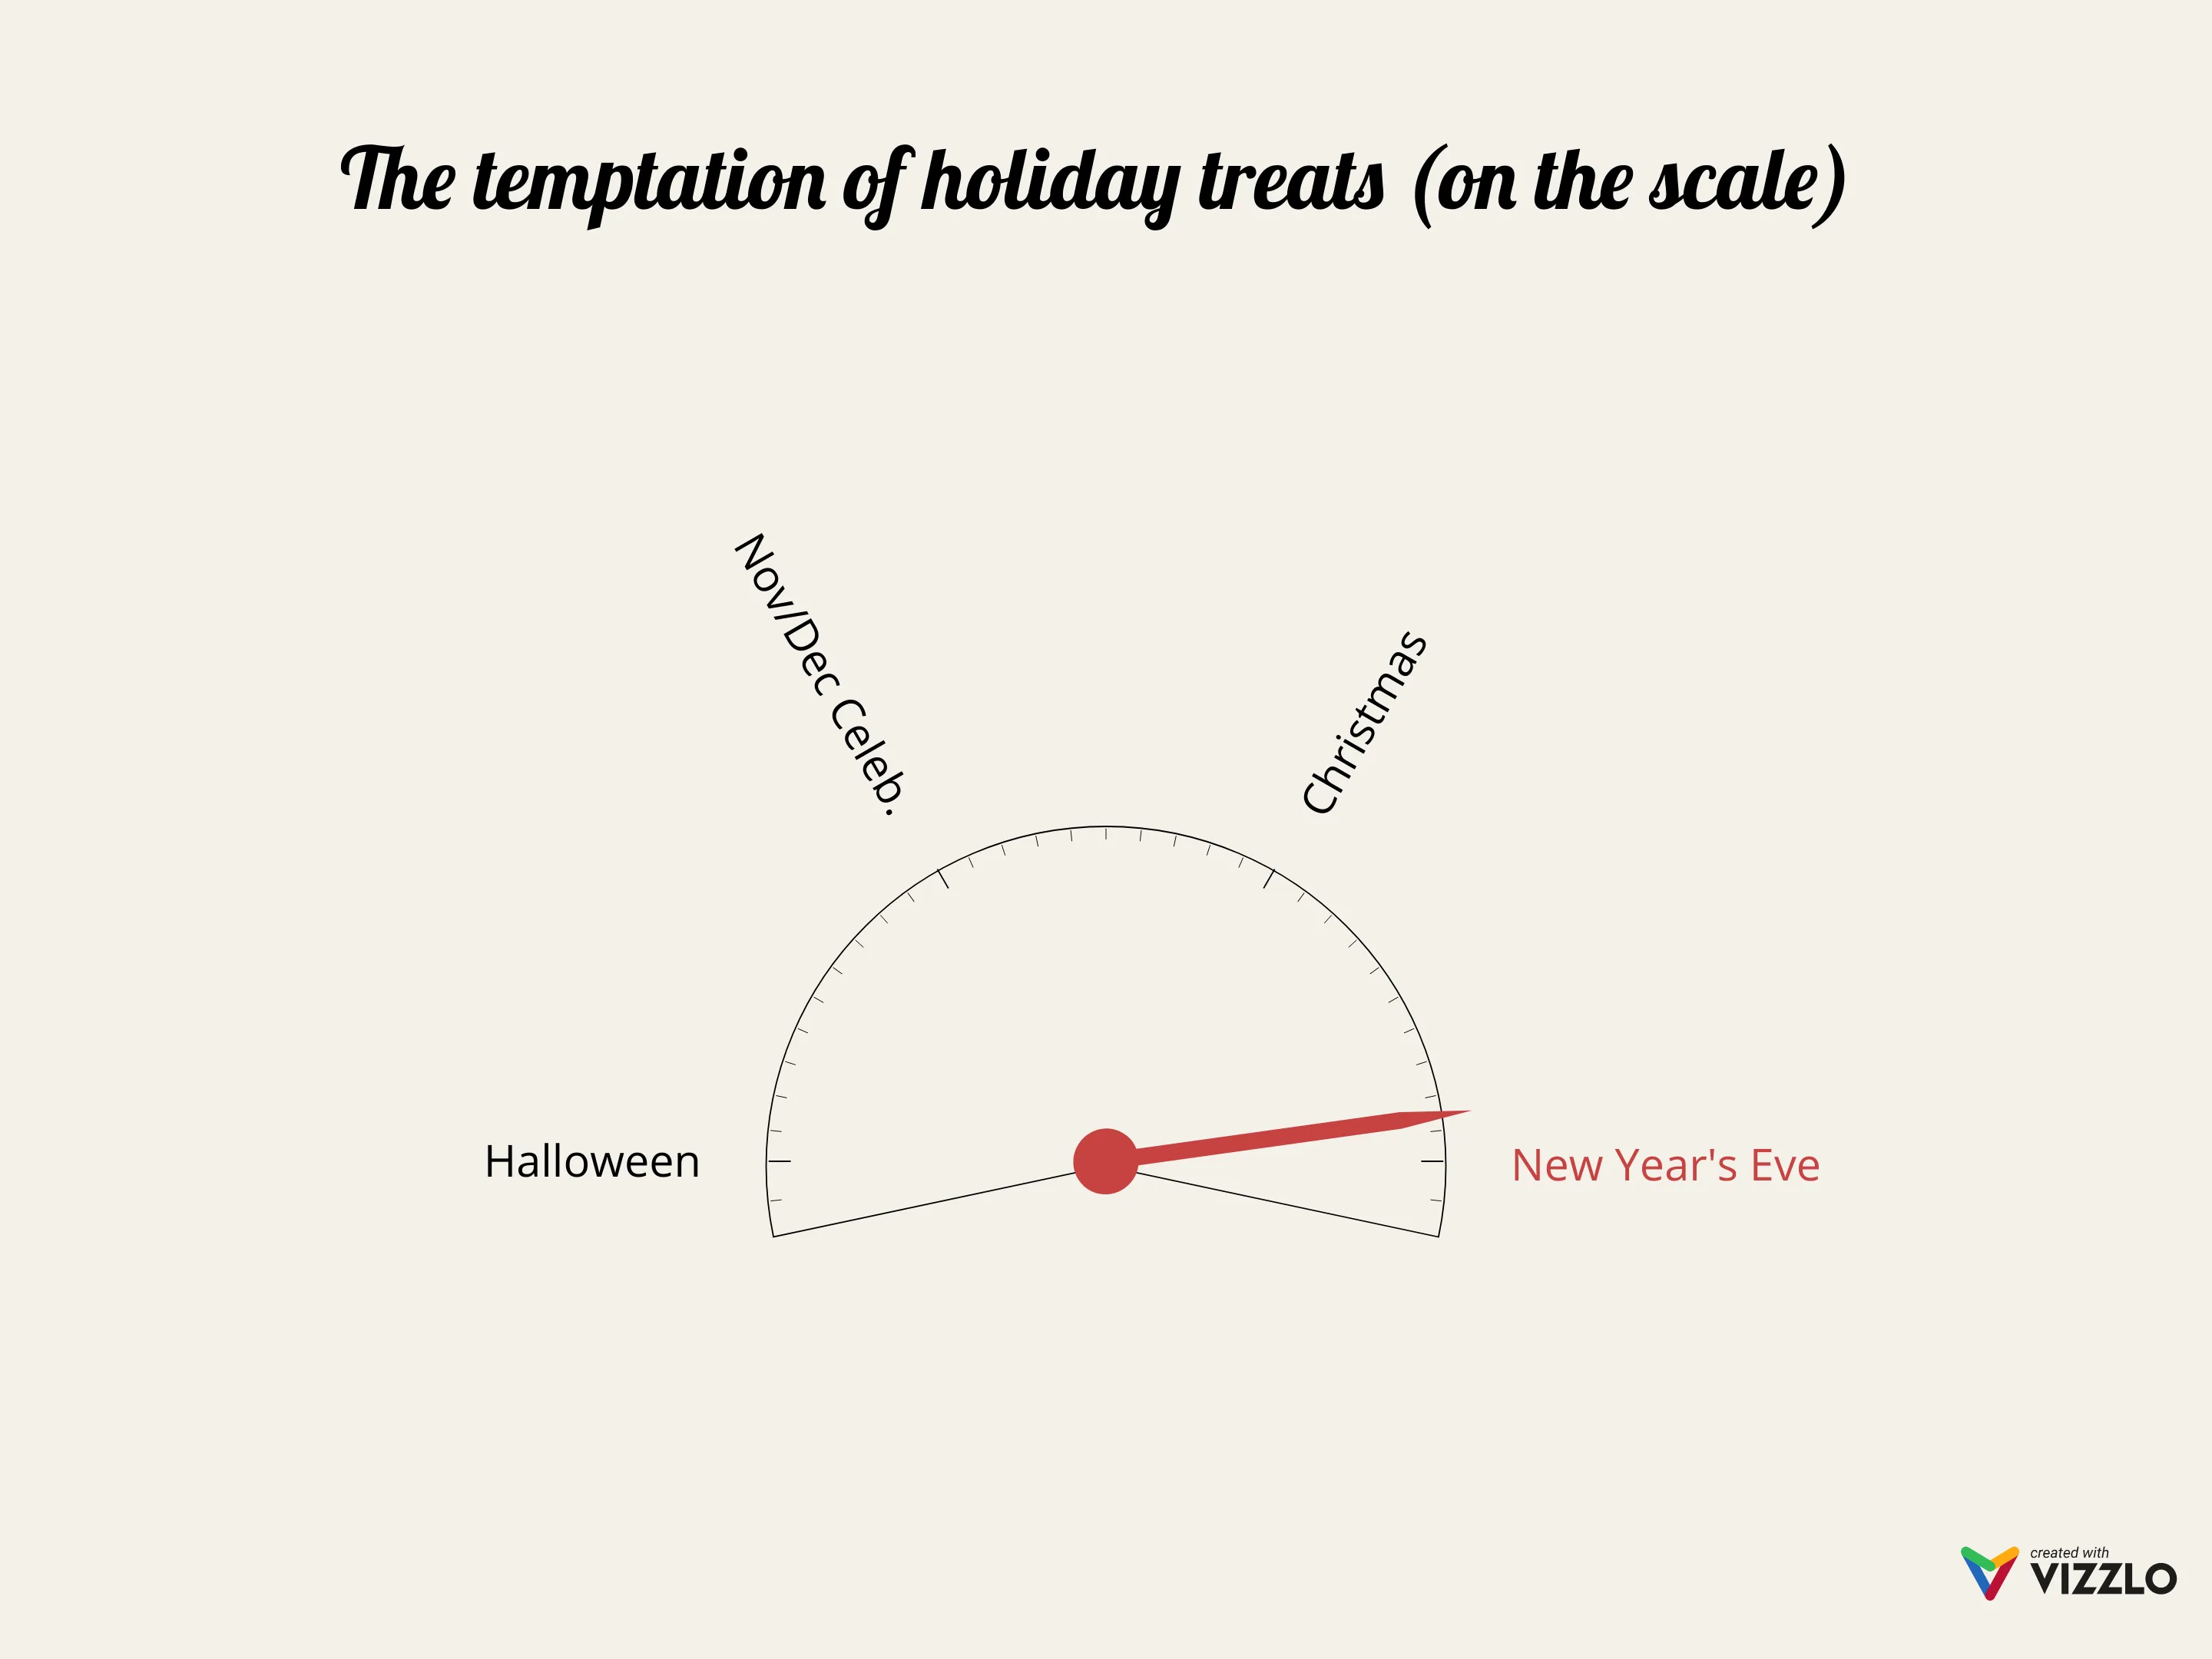 The temptation of holiday treats (on the scale)